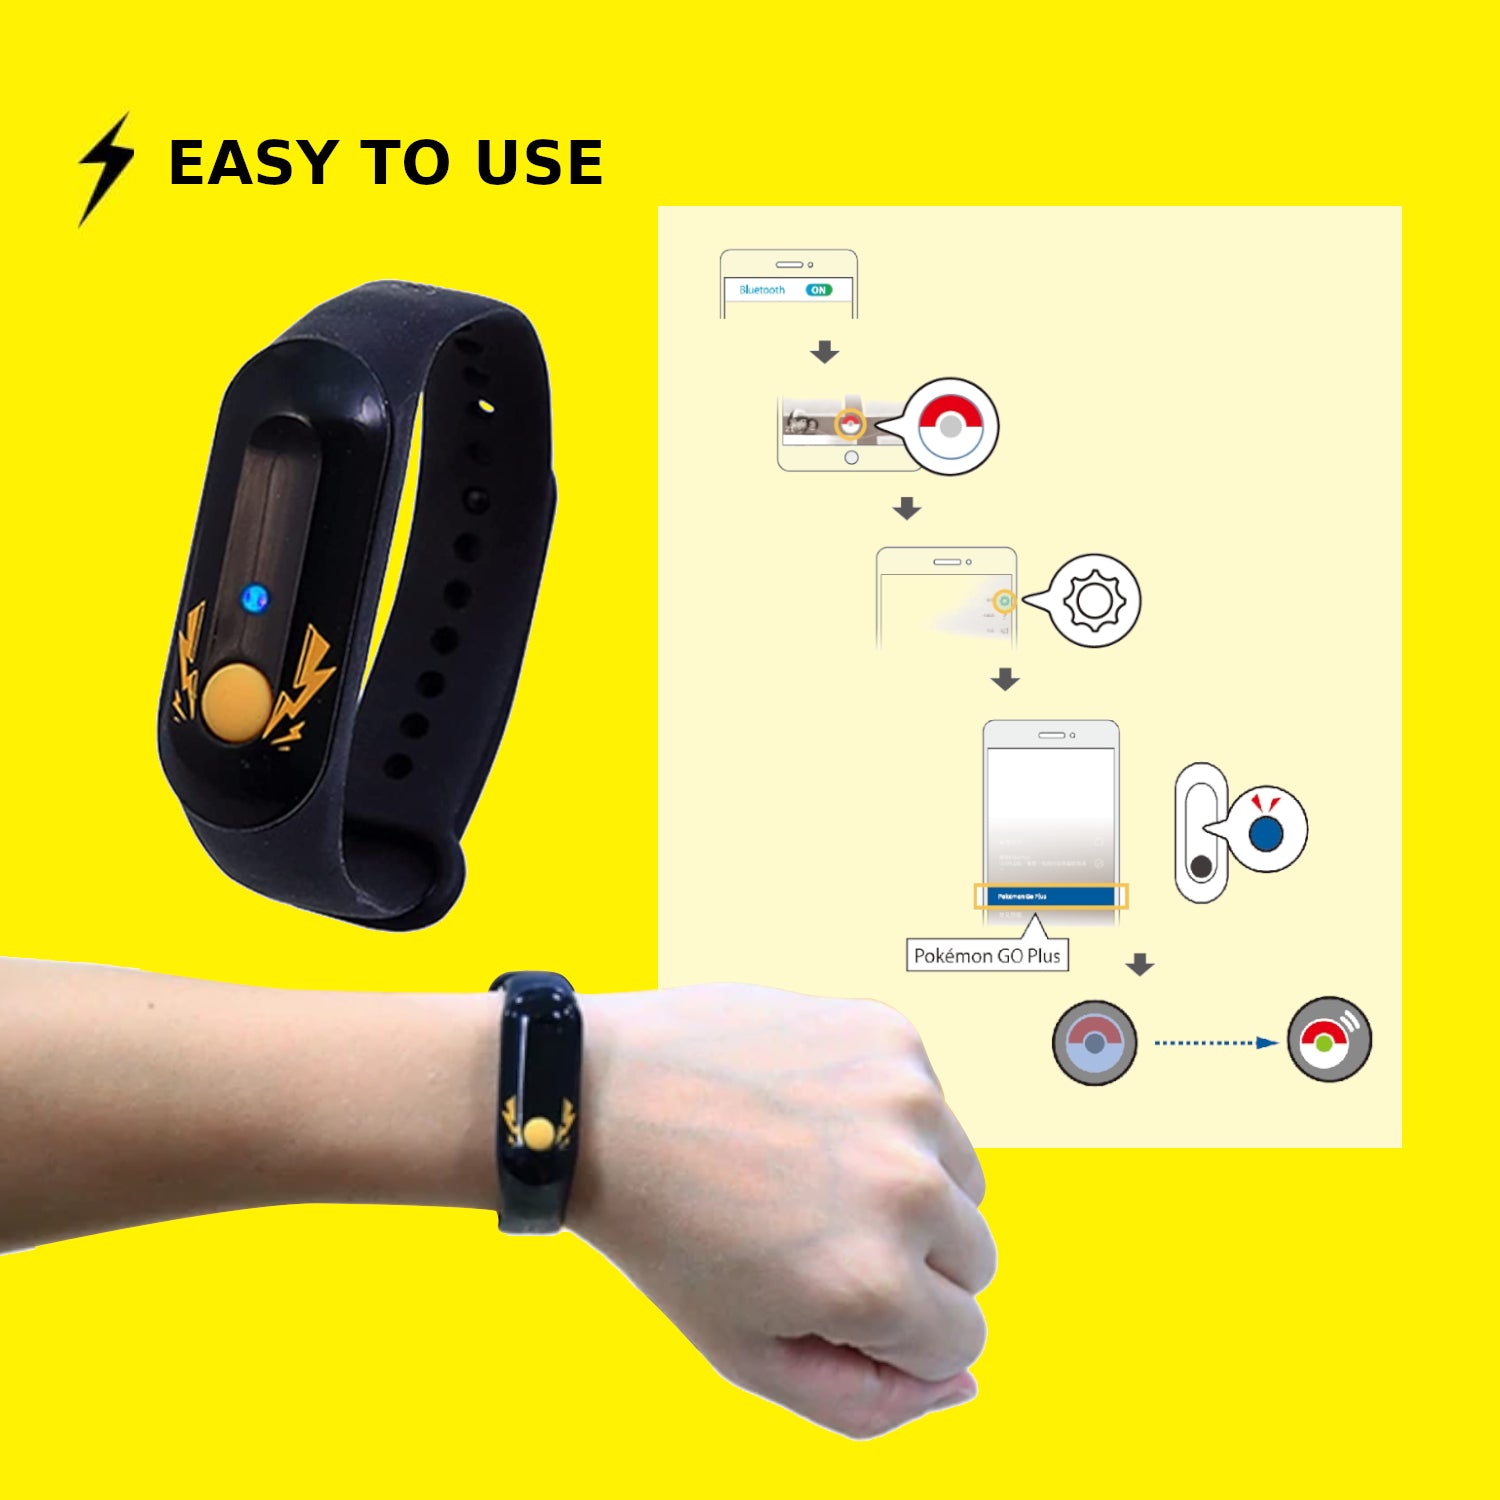 Brook Pocket Auto Catch - Auto catch compatible for Pokemon Go plus,  Catching Pokemon and collecting items just got easy